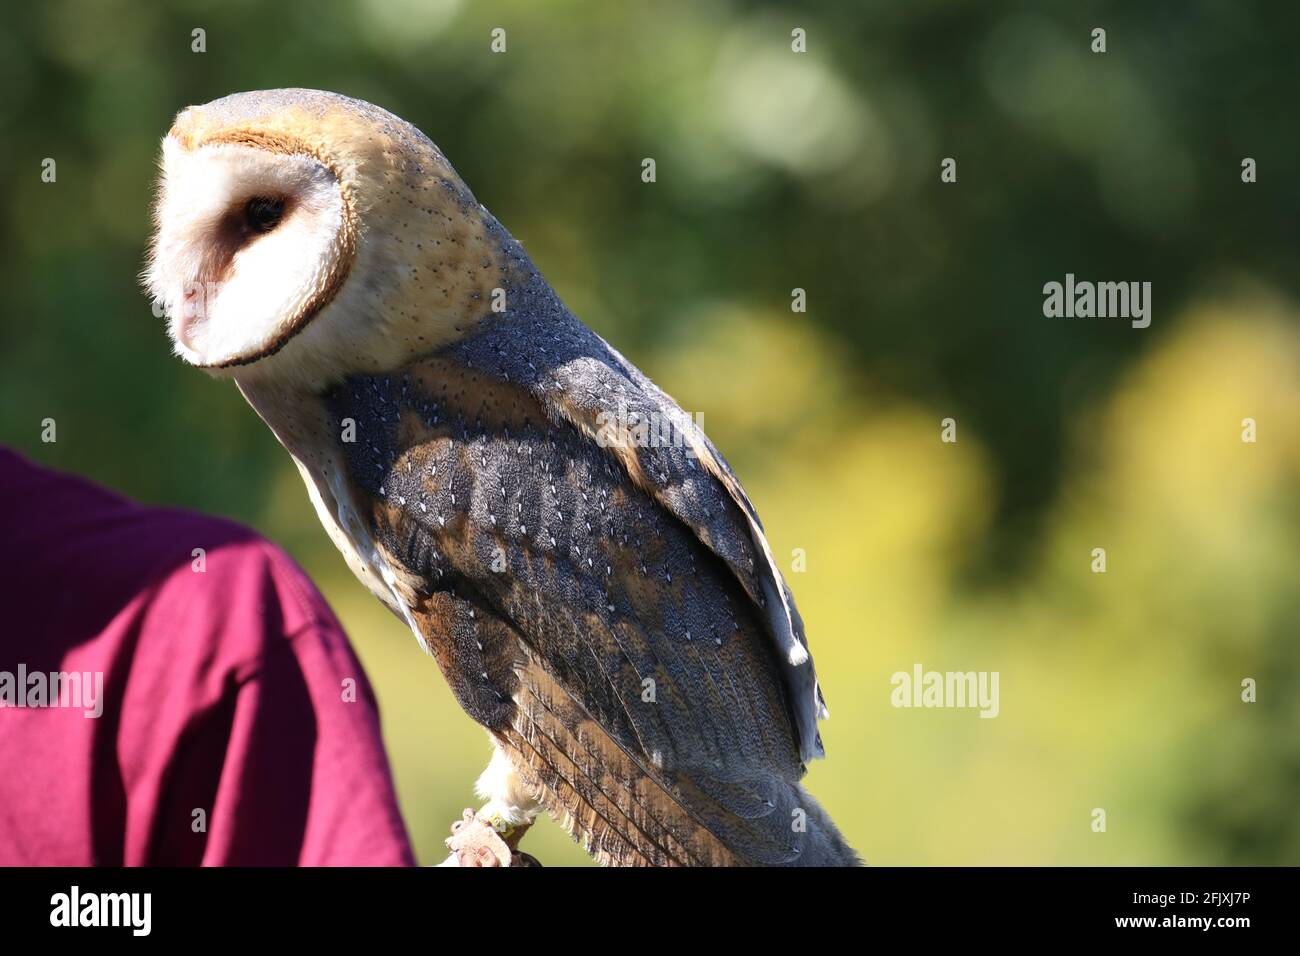 Barn owl looking to the left Stock Photo